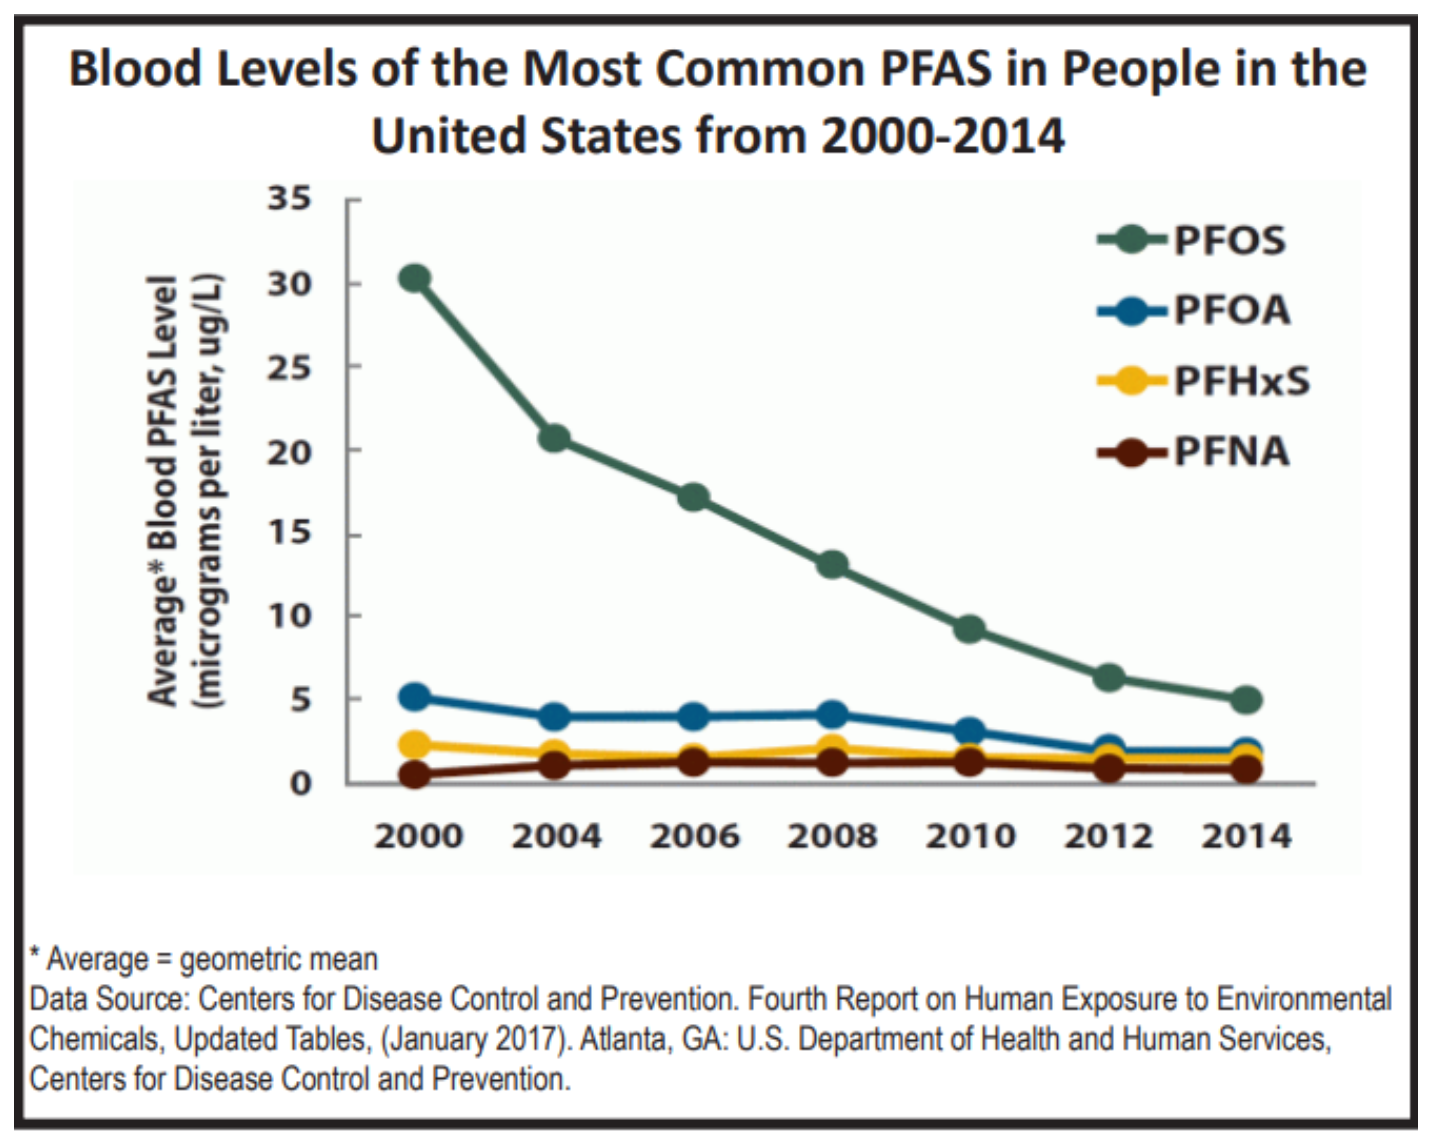 Graph showing blood levels of the most common PFAS in people in the United States from 2000-2014